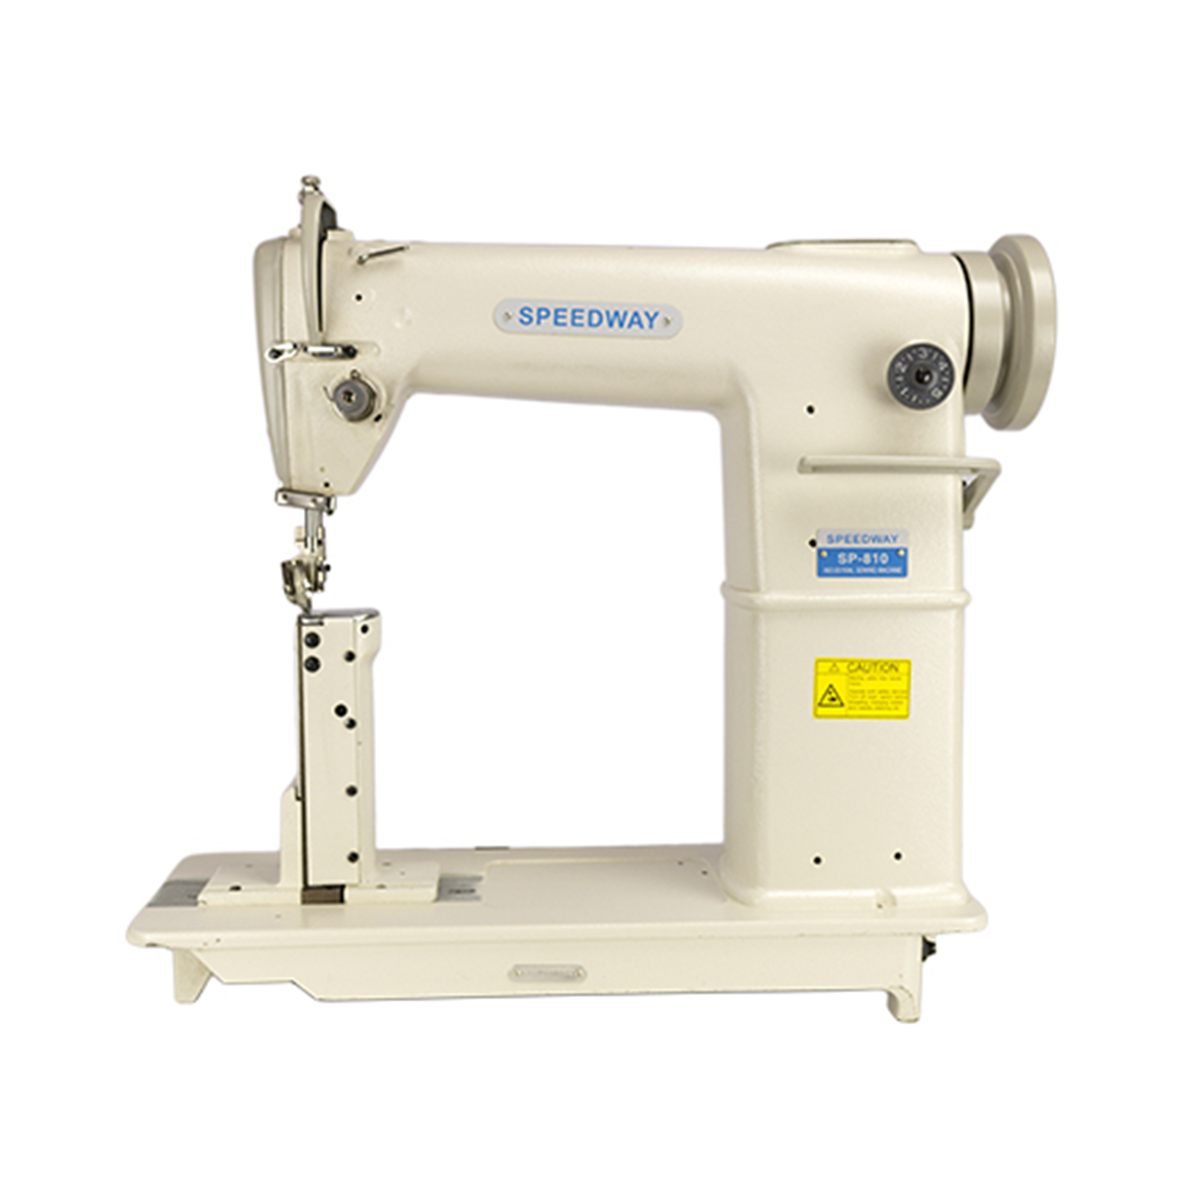 SPEEDWAY SW-810 Single Needle Post-bed Lockstitch Industrial Sewing Machine with Servo Motor, Table and Stand Included